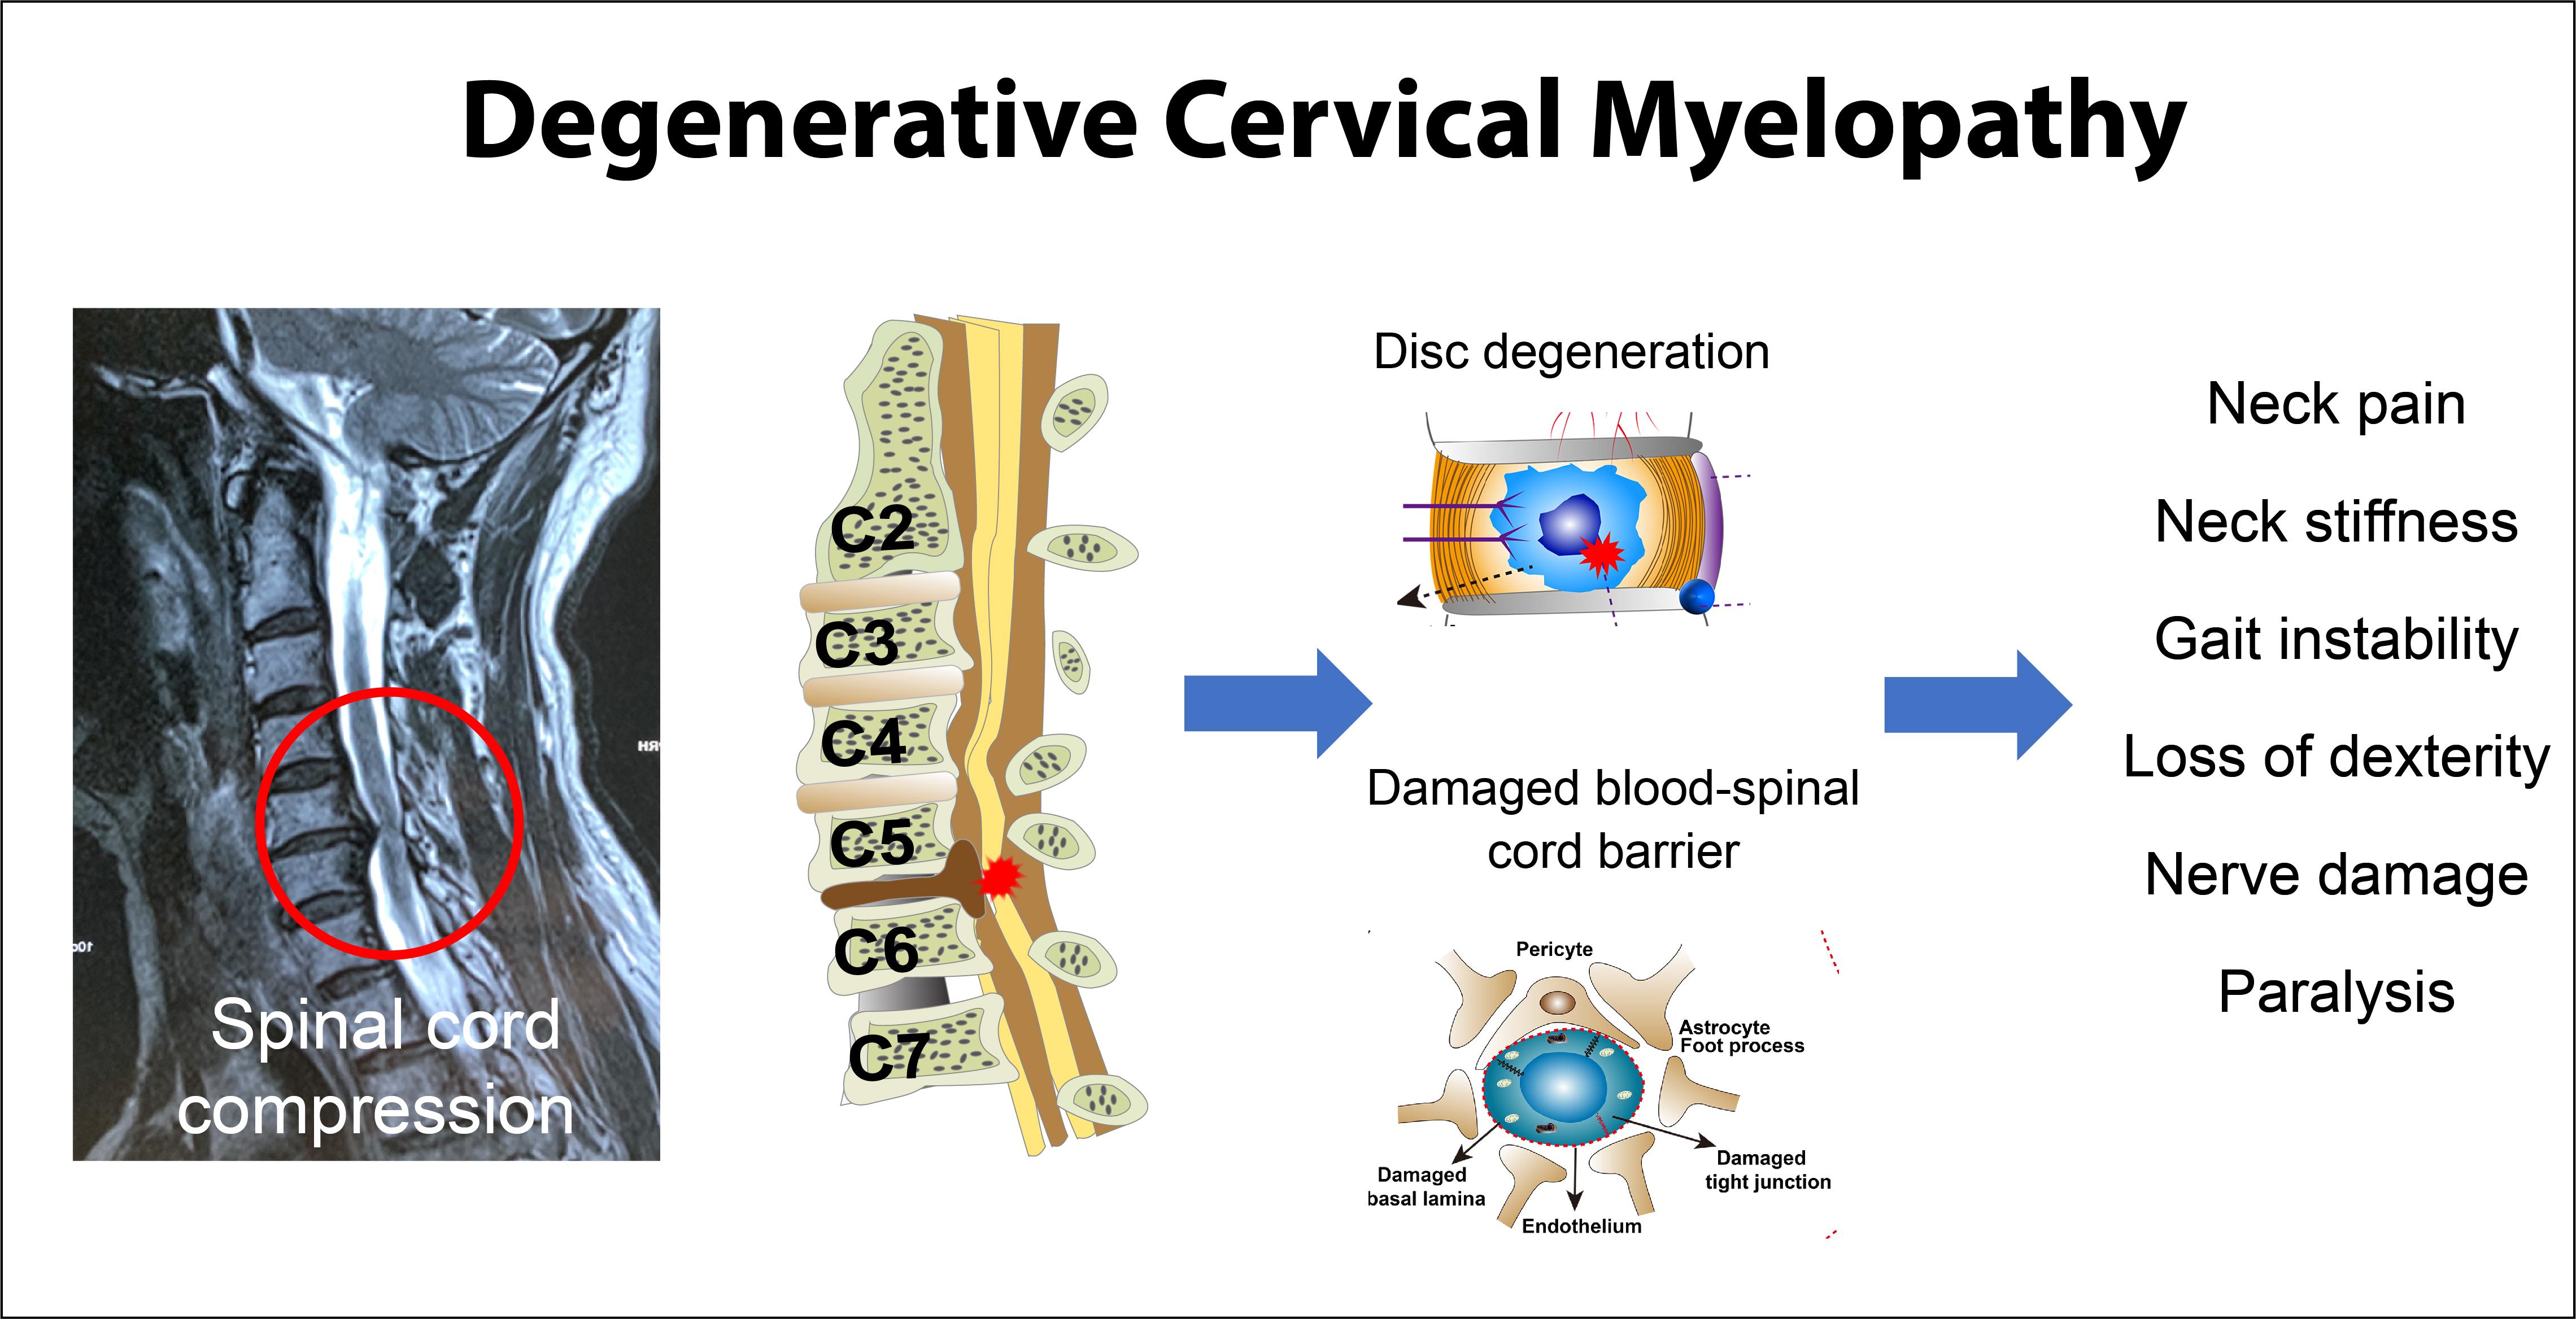 Jcm Free Full Text Degenerative Cervical Myelopathy Insights Into Its Pathobiology And Molecular Mechanisms Html